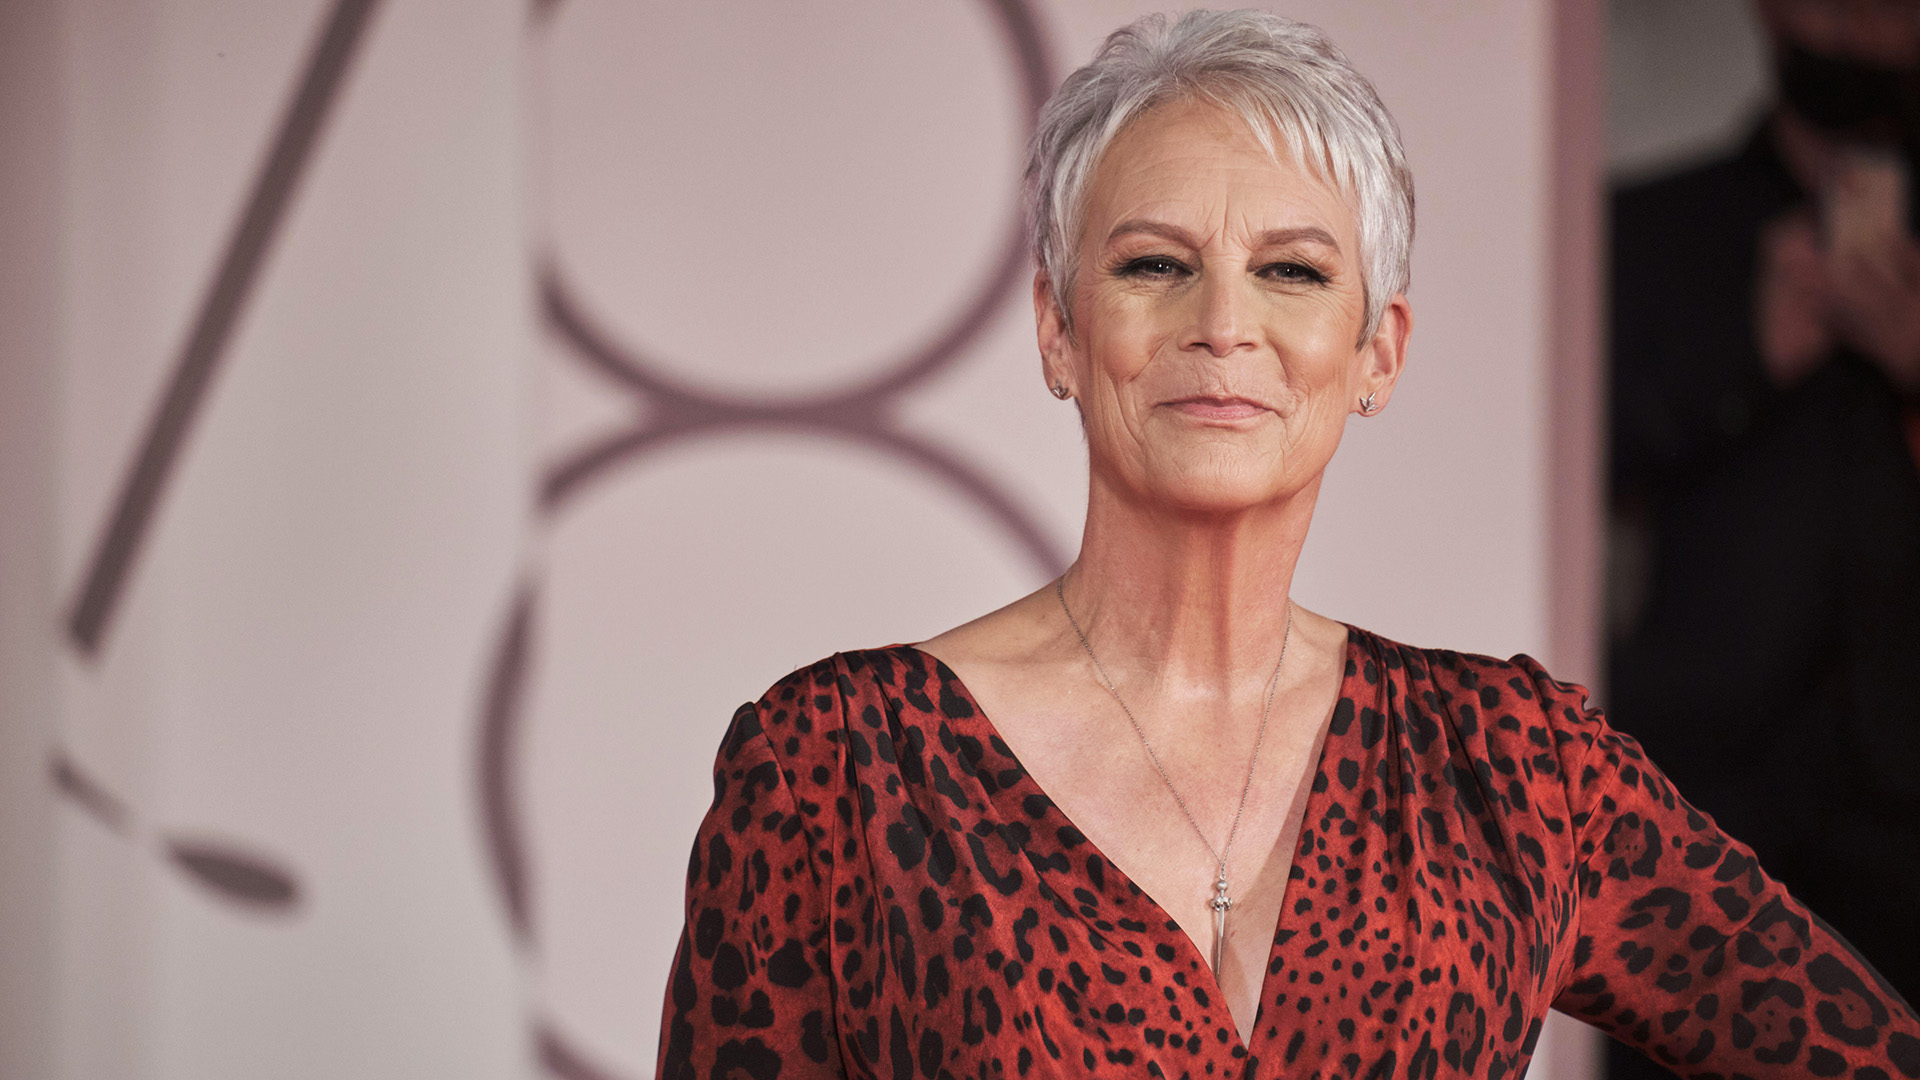 Fashion Over 50: Four Ways to Look Ageless Without Looking Like You're Trying Too Hard